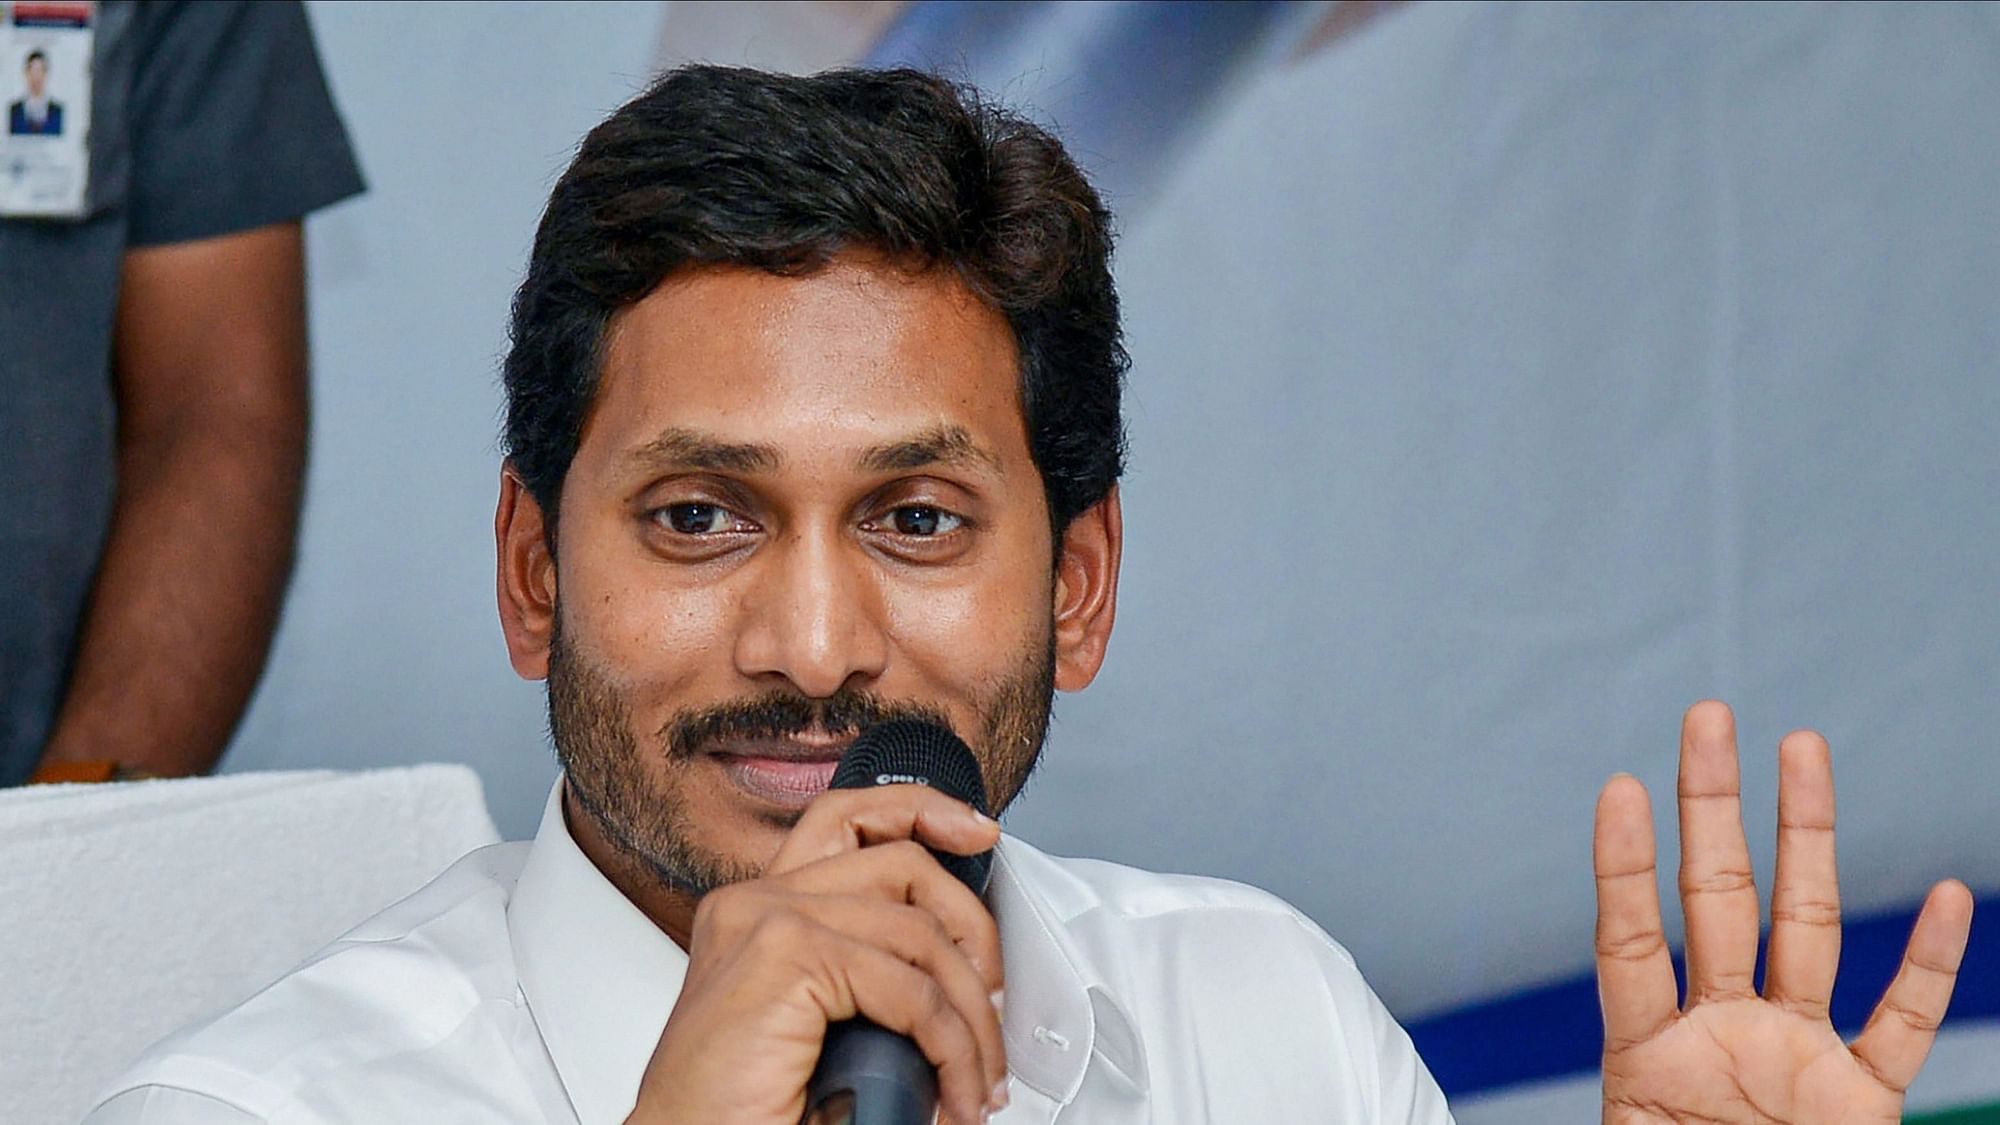 Andhra Pradesh Chief Minister Jaganmohan Reddy has been summoned to appear before a special Enforcement Directorate court in Hyderabad.